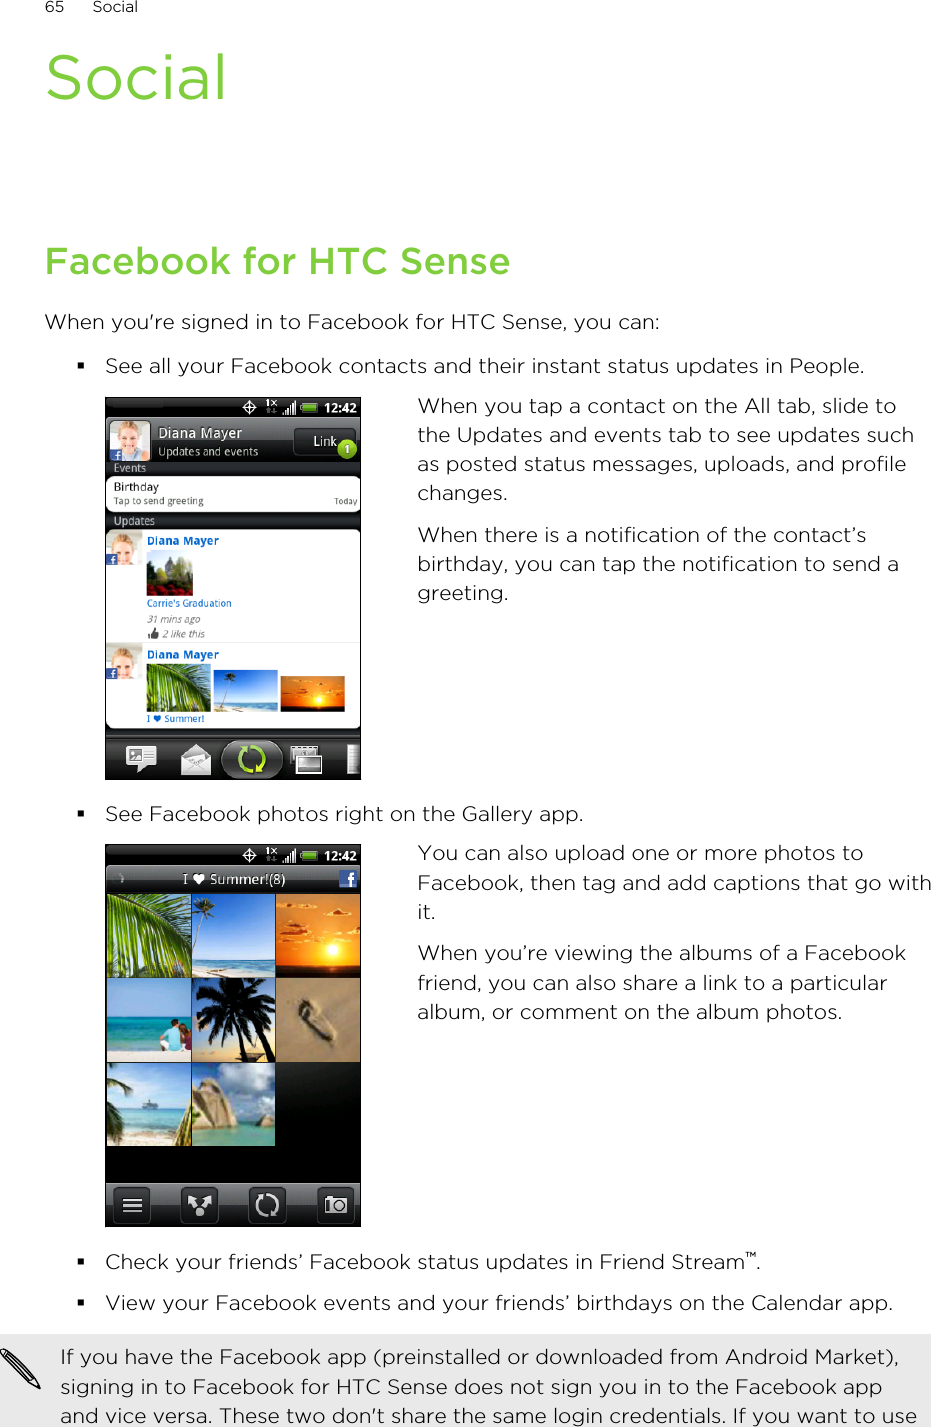 SocialFacebook for HTC SenseWhen you&apos;re signed in to Facebook for HTC Sense, you can:§See all your Facebook contacts and their instant status updates in People.When you tap a contact on the All tab, slide tothe Updates and events tab to see updates suchas posted status messages, uploads, and profilechanges.When there is a notification of the contact’sbirthday, you can tap the notification to send agreeting.§See Facebook photos right on the Gallery app.You can also upload one or more photos toFacebook, then tag and add captions that go withit.When you’re viewing the albums of a Facebookfriend, you can also share a link to a particularalbum, or comment on the album photos.§Check your friends’ Facebook status updates in Friend Stream™.§View your Facebook events and your friends’ birthdays on the Calendar app.If you have the Facebook app (preinstalled or downloaded from Android Market),signing in to Facebook for HTC Sense does not sign you in to the Facebook appand vice versa. These two don&apos;t share the same login credentials. If you want to use65 Social